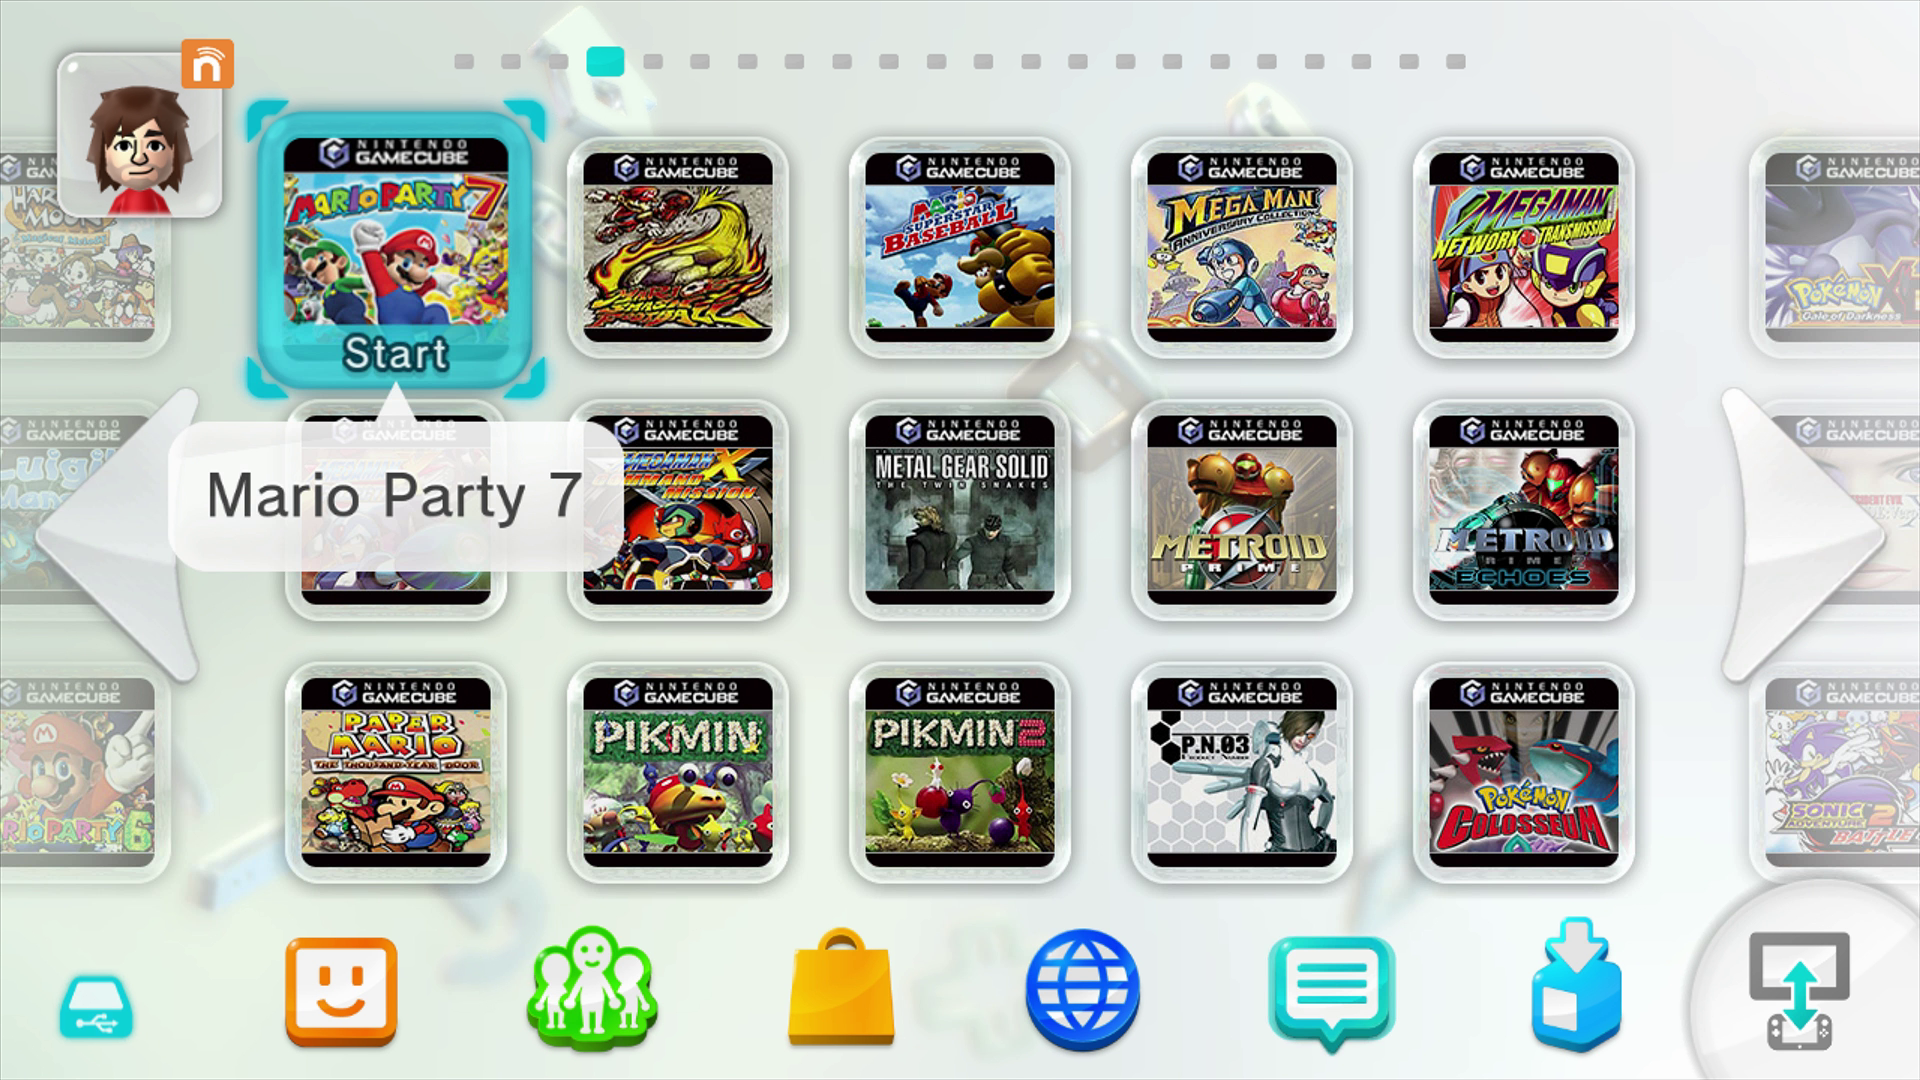 How to Play GameCube Games on Your Wii U With Nintendont - The